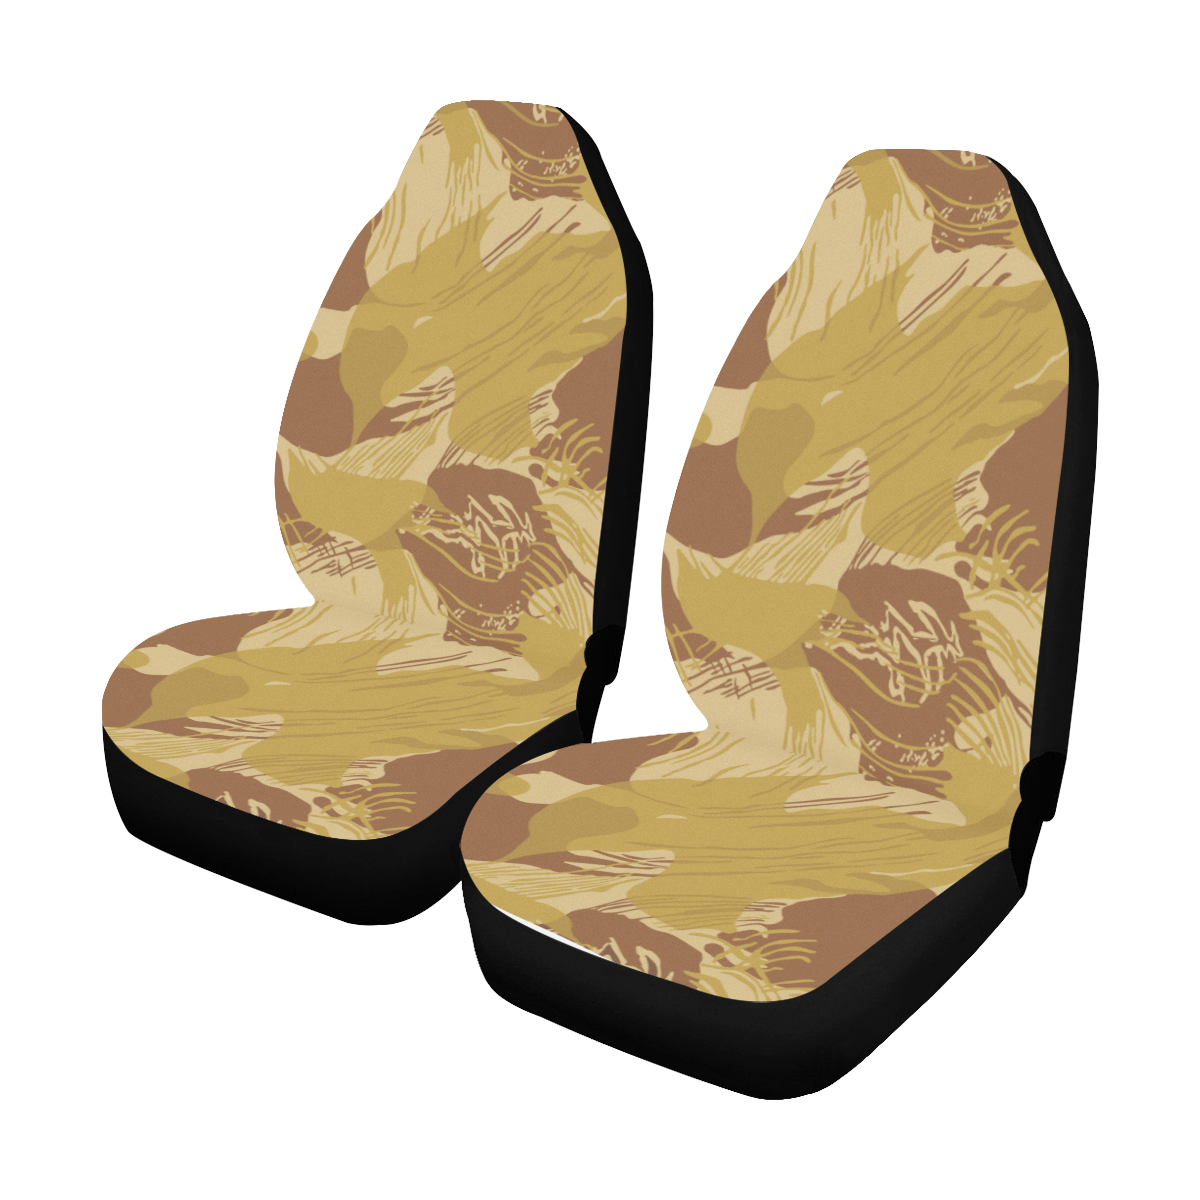 rhodesian experimental desert camouflage Car Seat Covers (Set of 2)